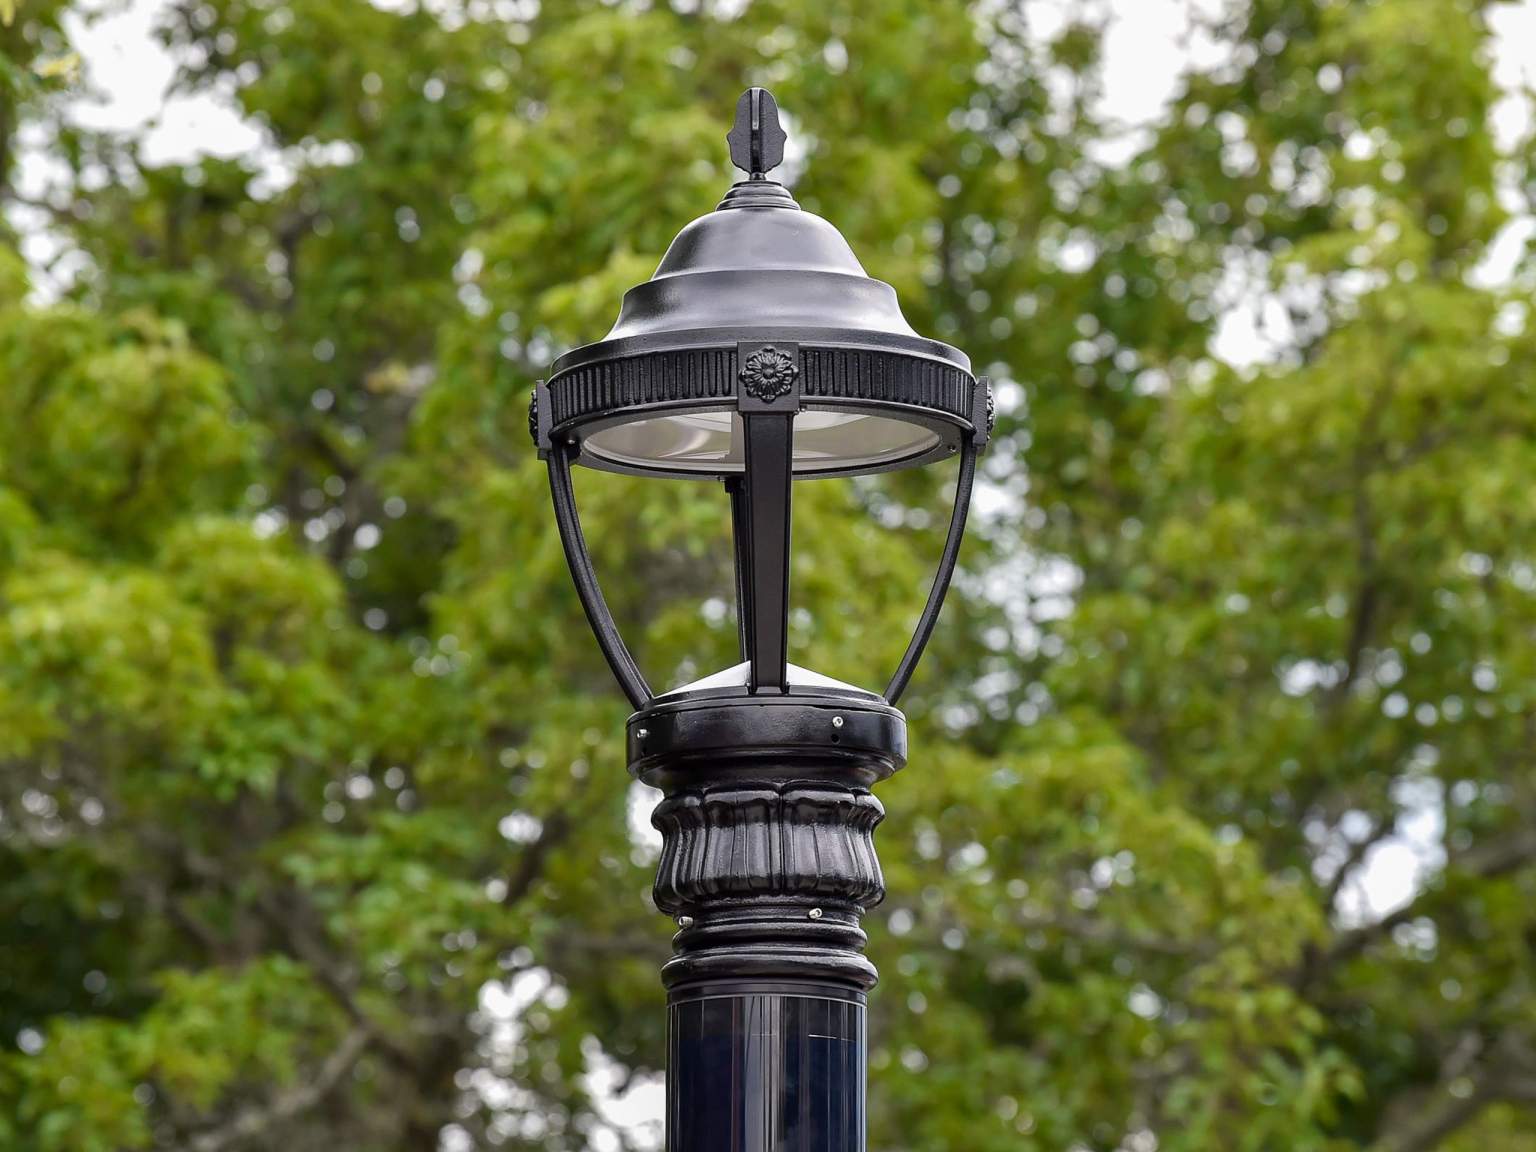 Classical light fixture connected to Soluxio solar street light